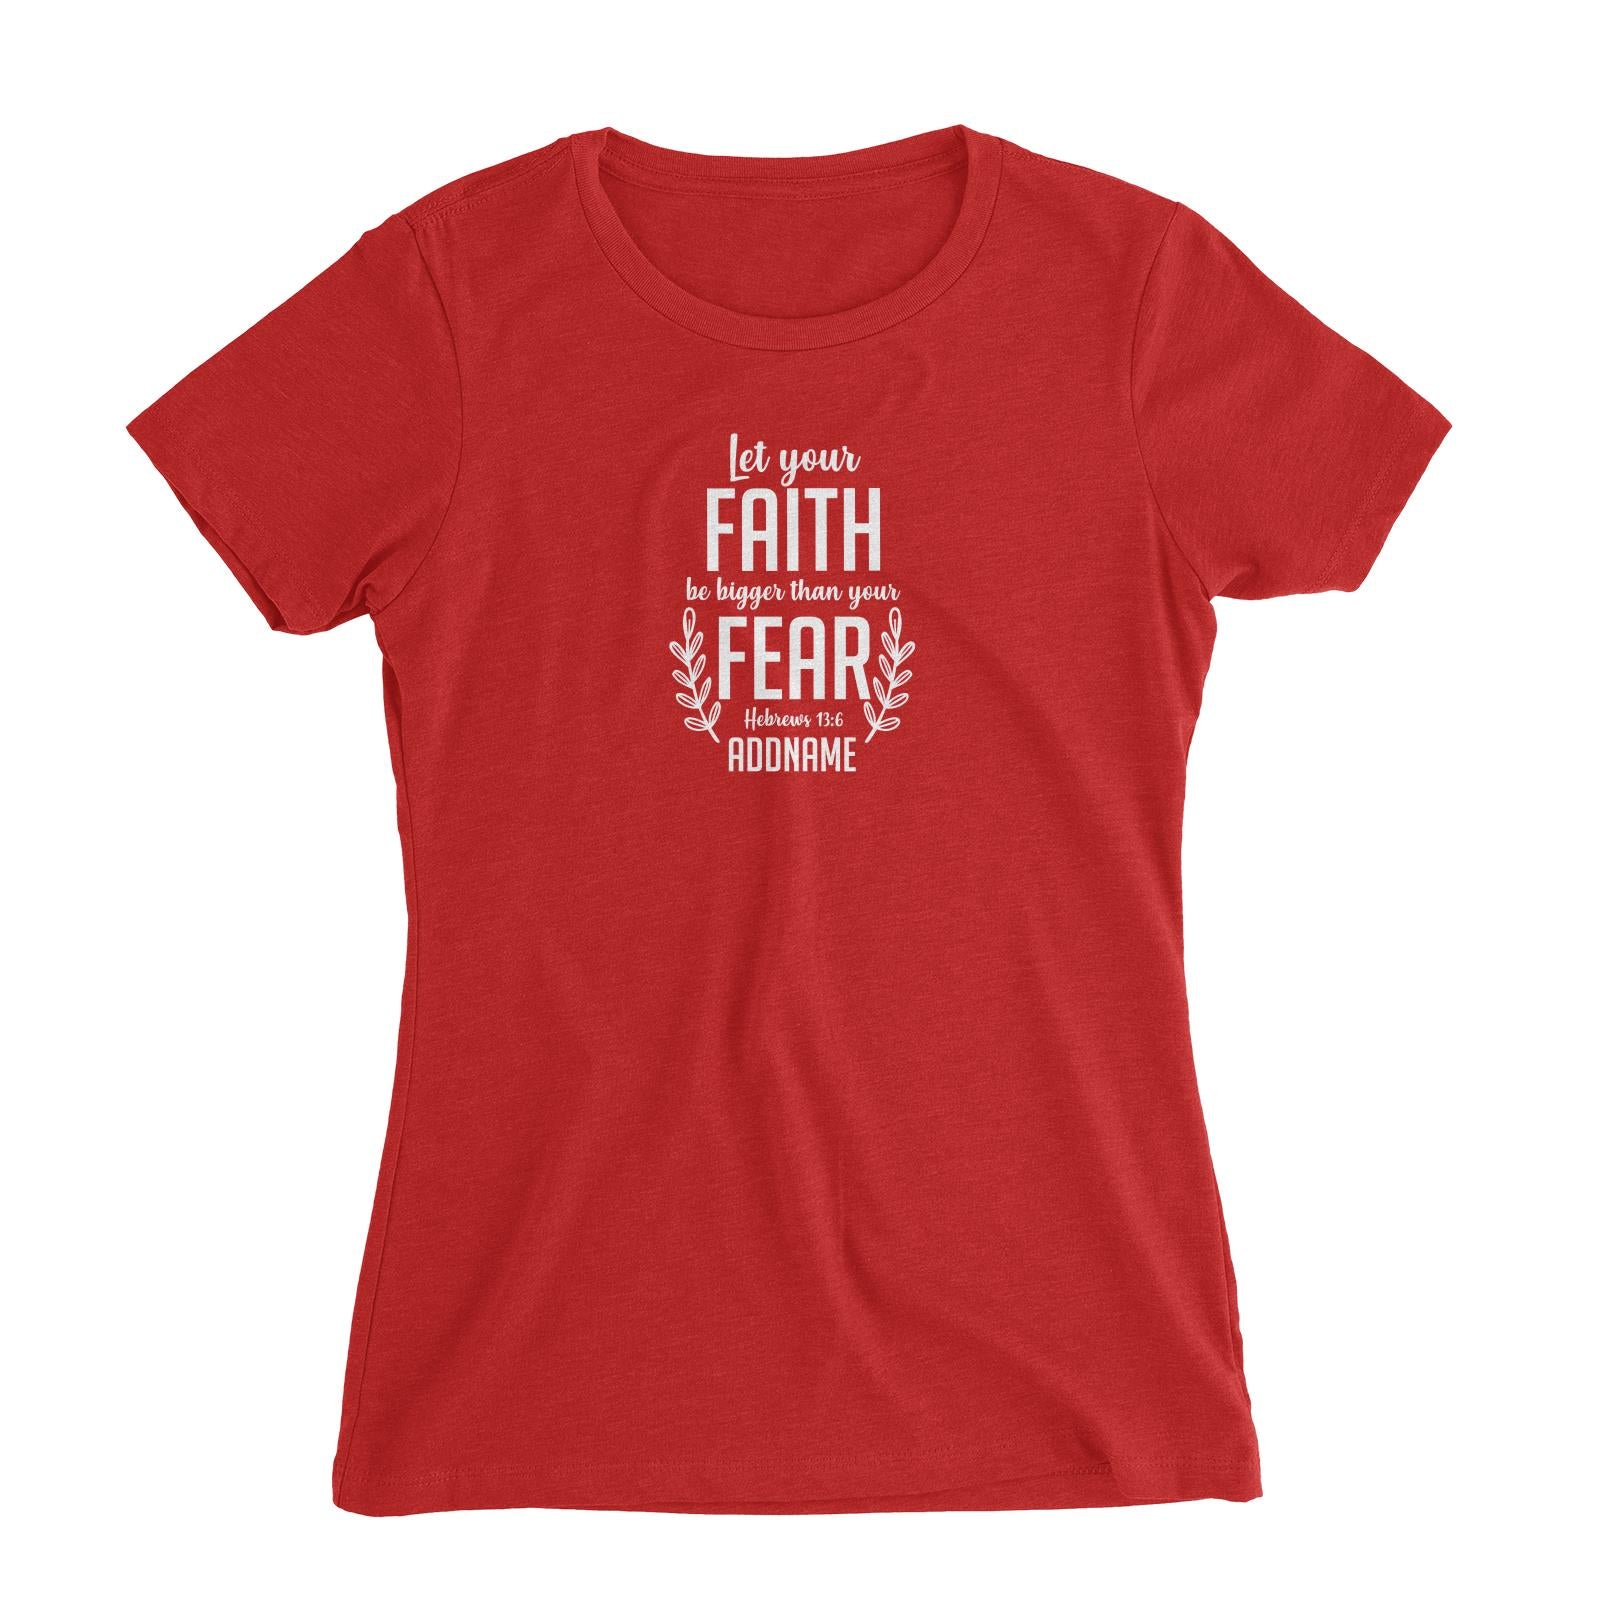 Christ Newborn Let Your Faith Be Bigger Than Your Fear Hebrews 13.6 Addname Women Slim Fit T-Shirt